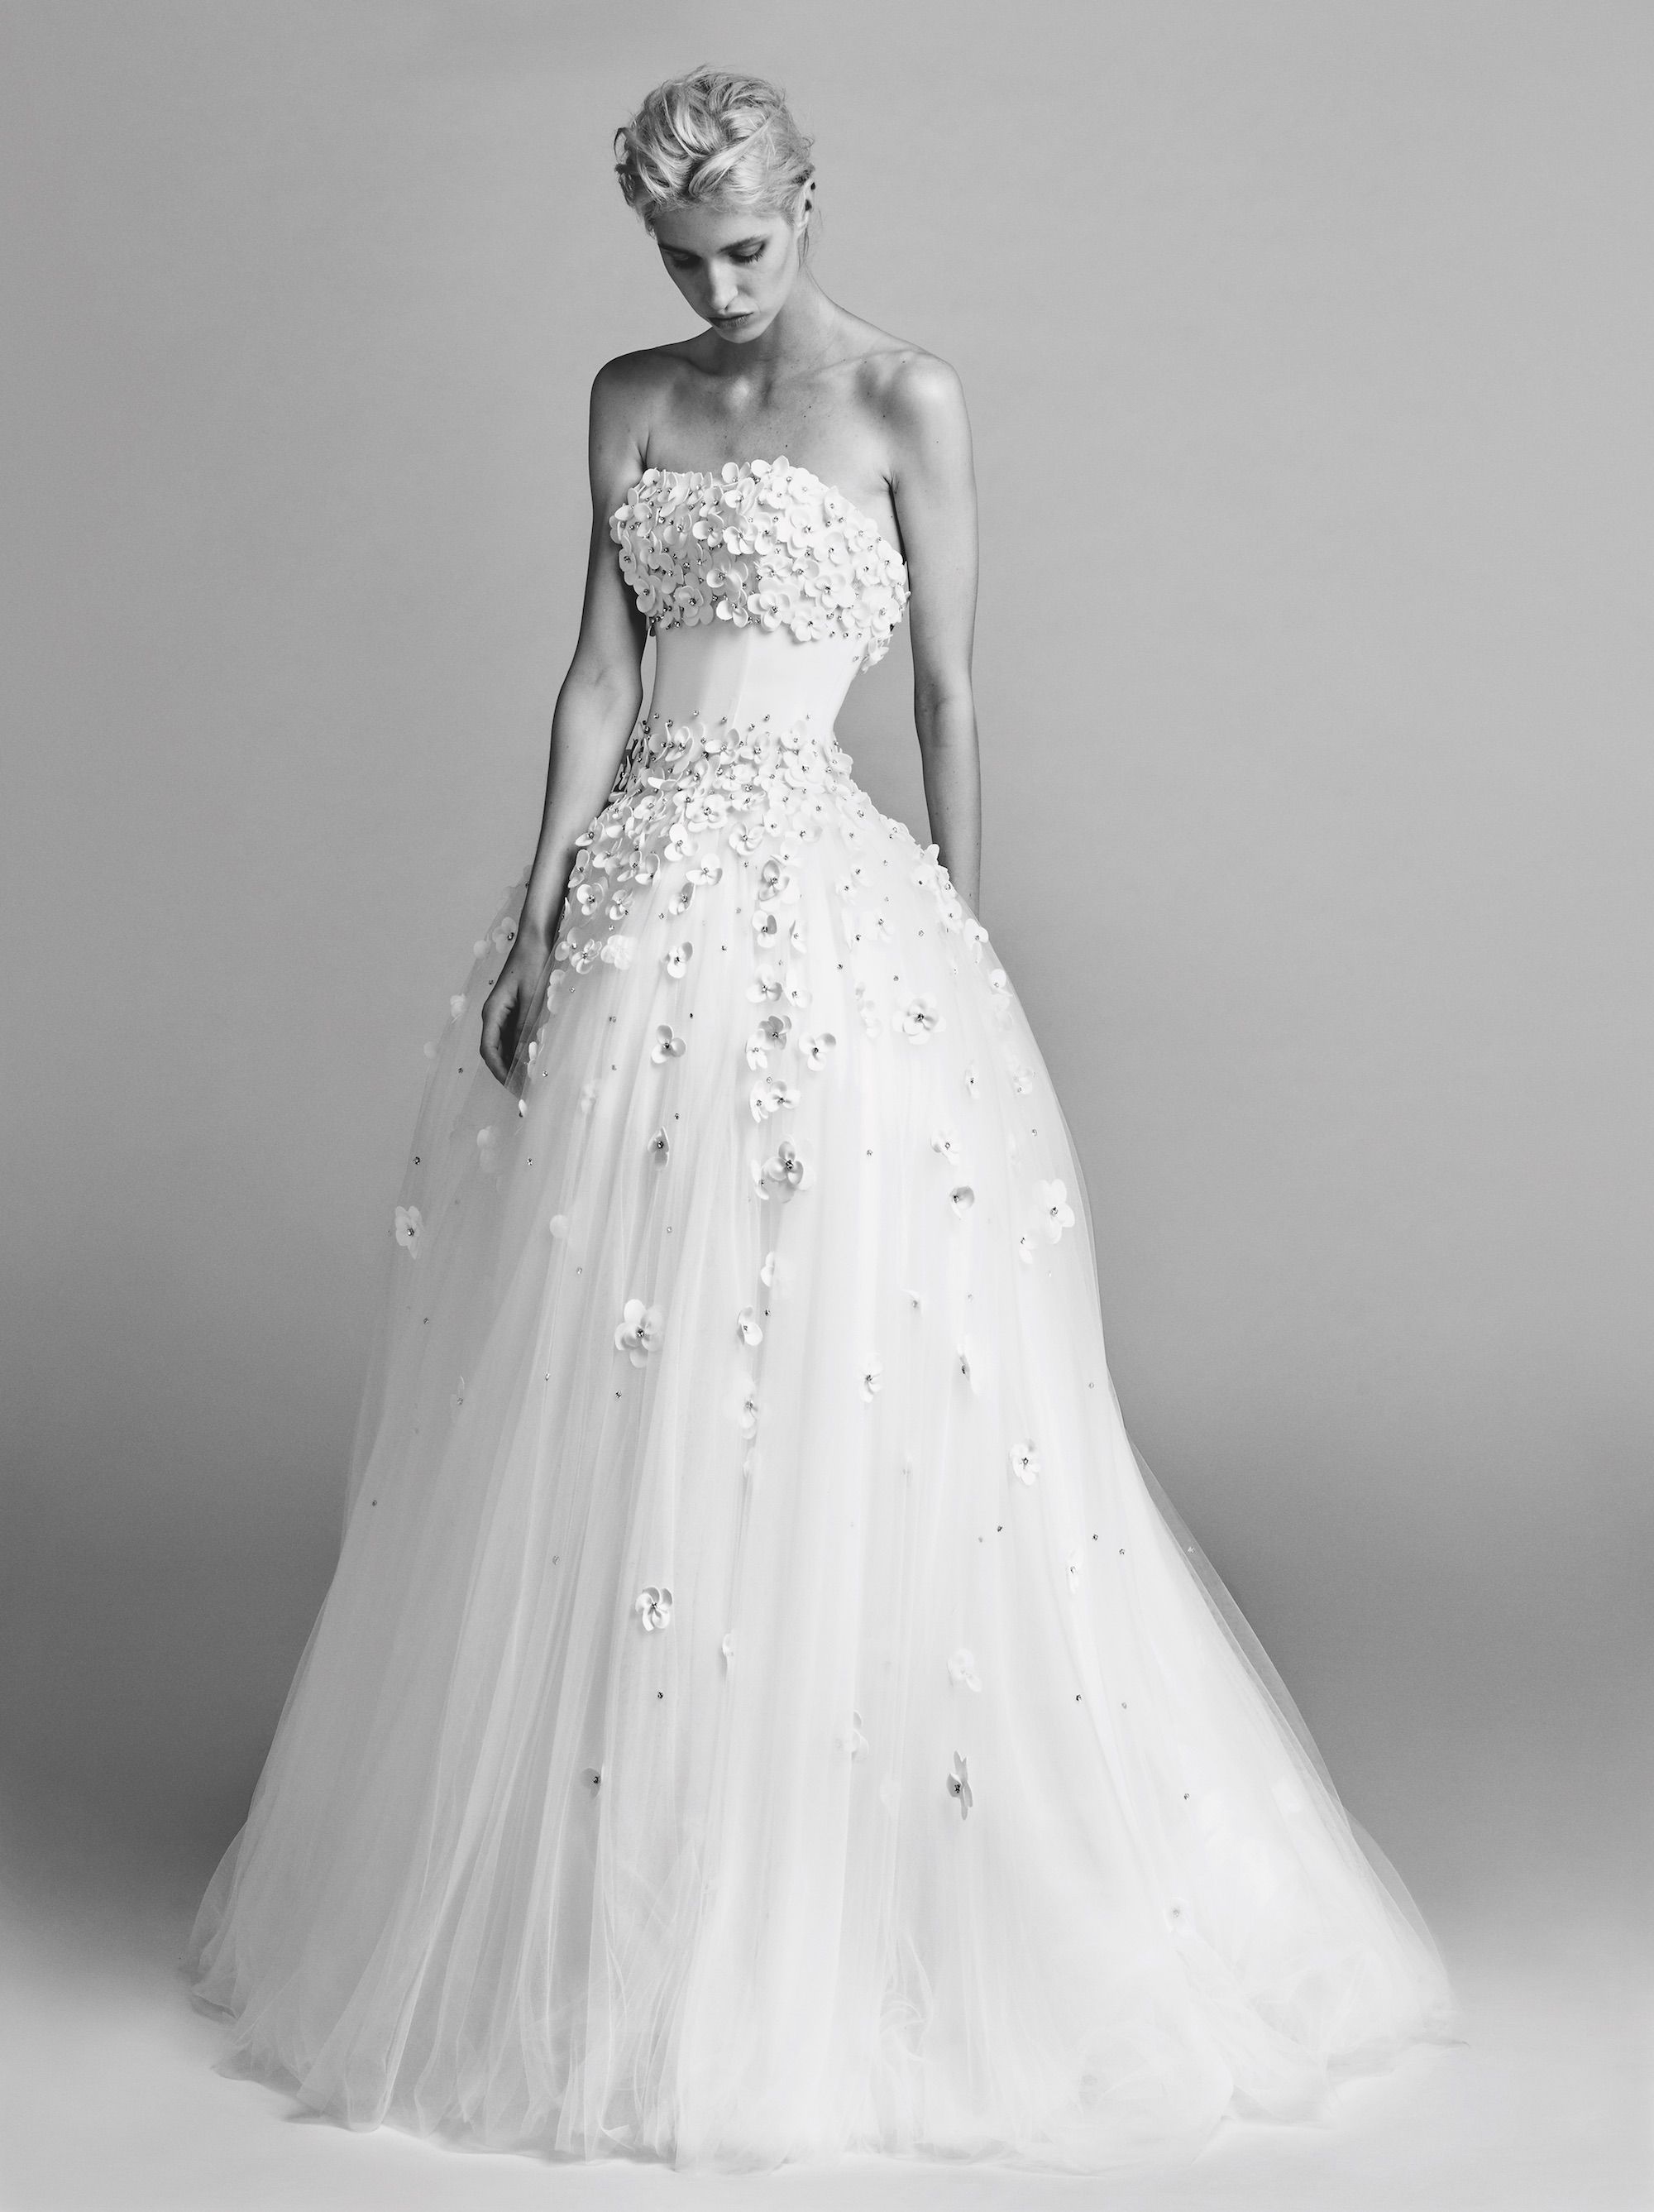 Viktor & Rolf launches first full bridal collection